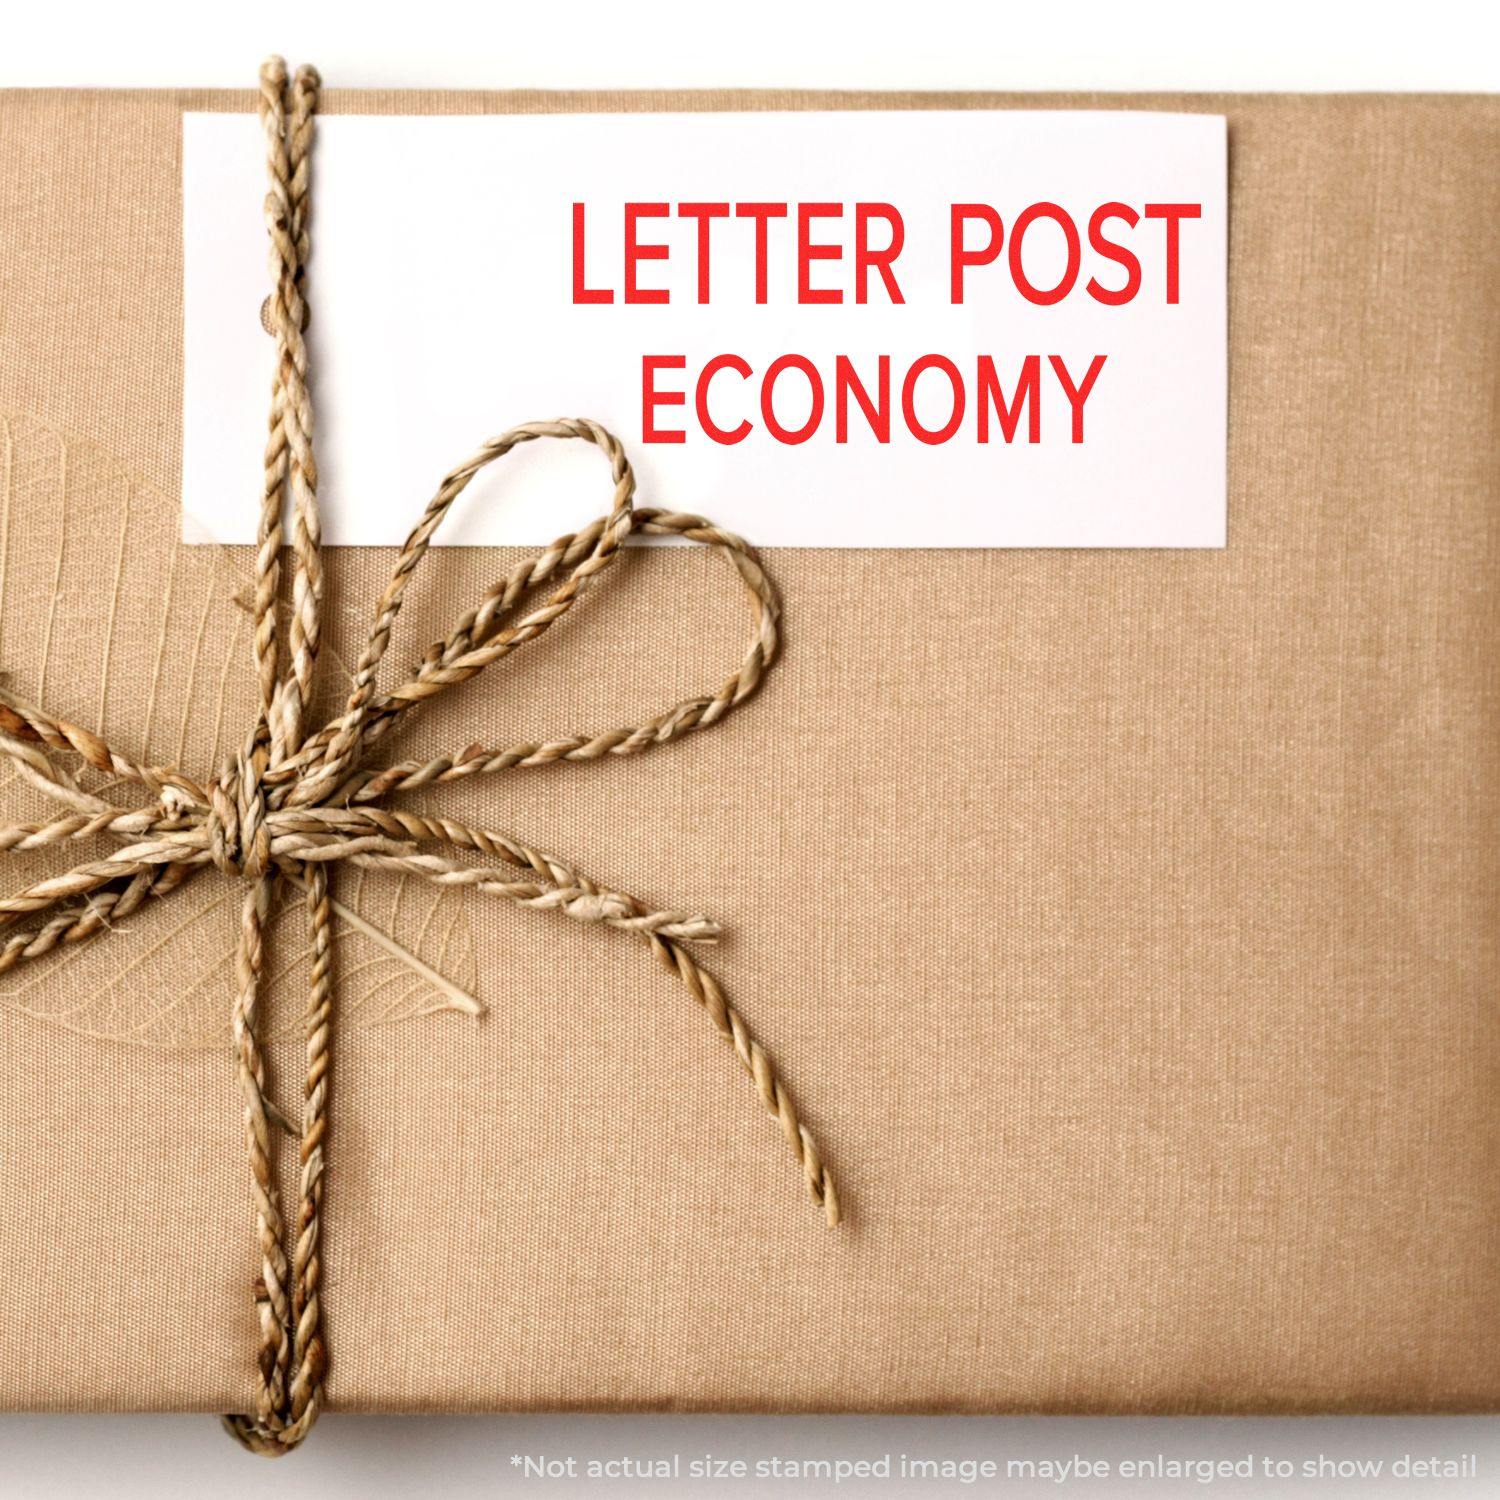 A stock office rubber stamp with a stamped image showing how the text "LETTER POST ECONOMY" is displayed after stamping.